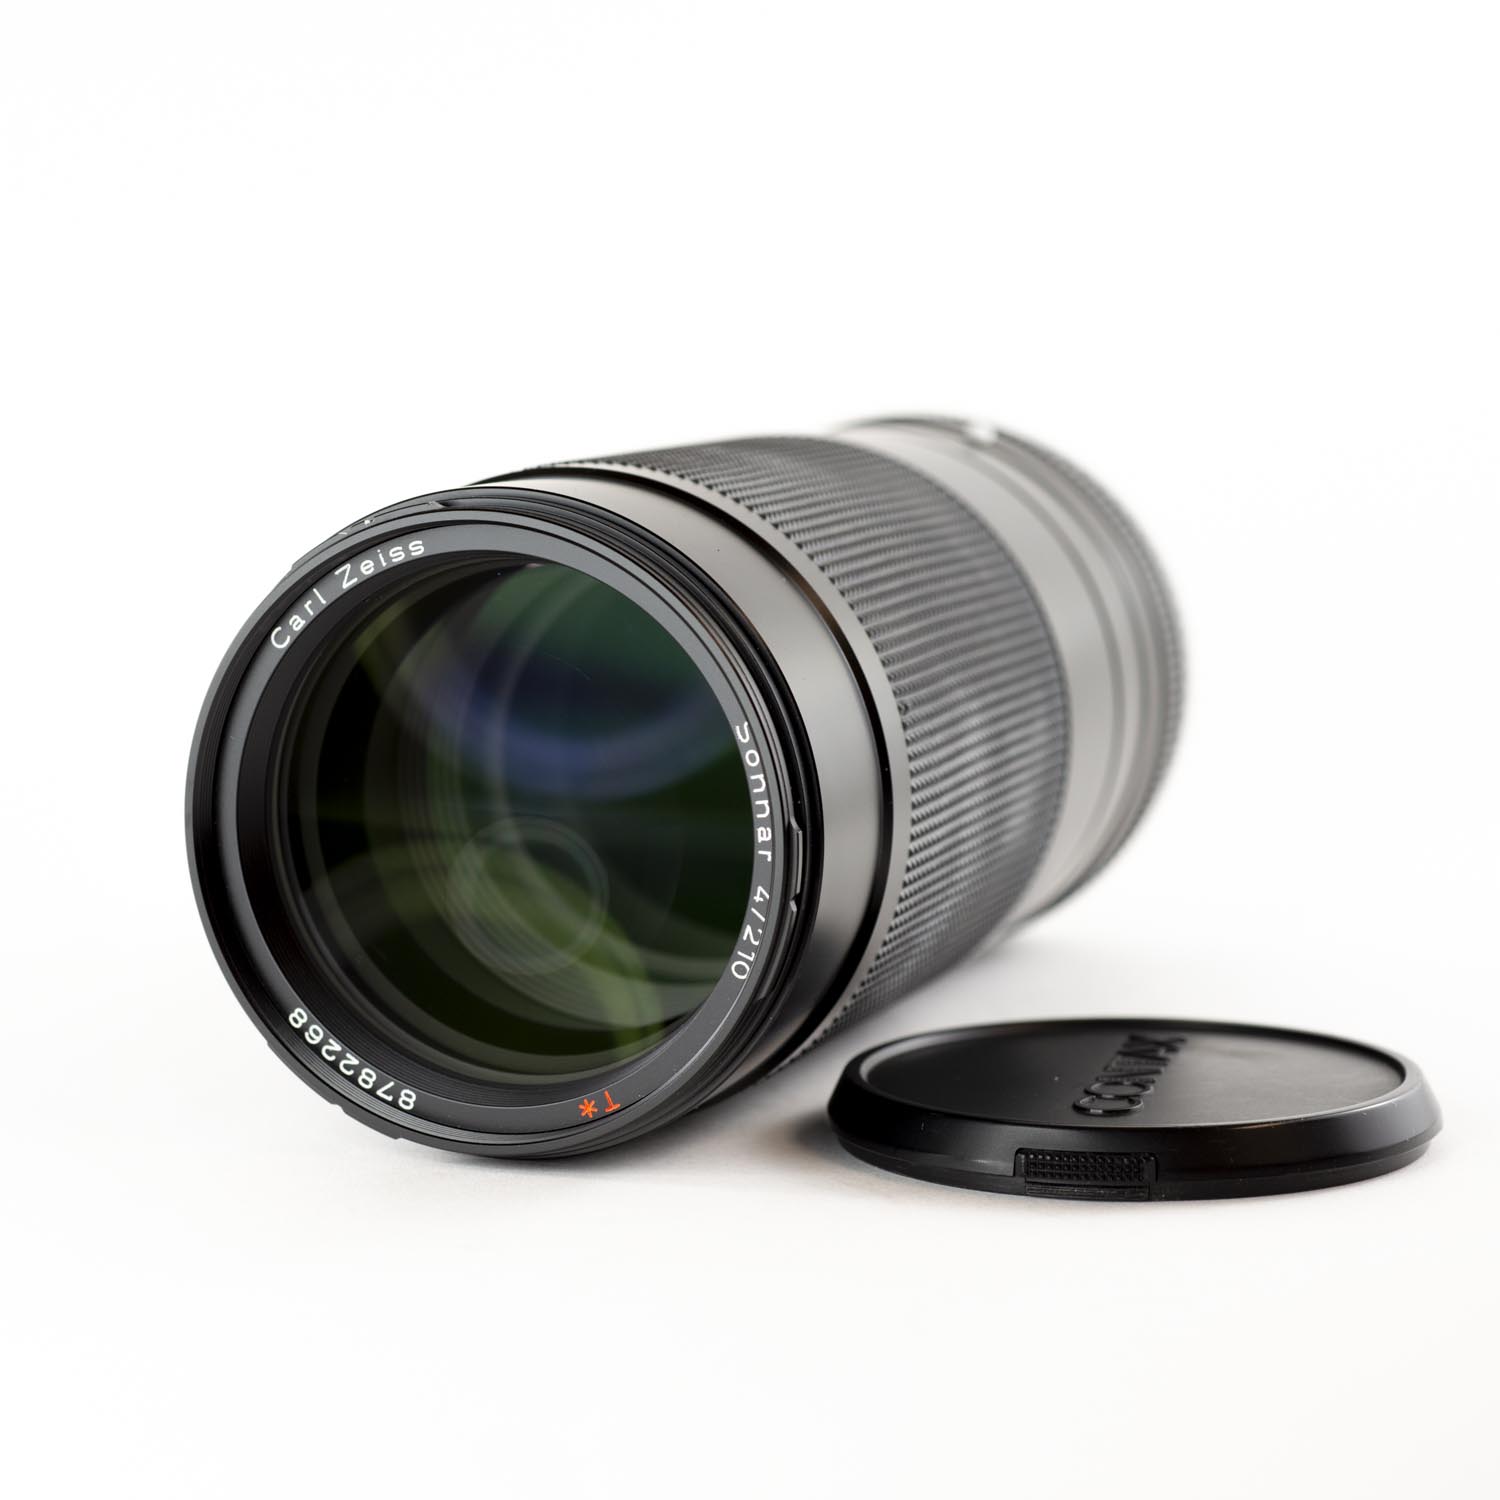 Carl Zeiss Sonnar T* 210mm f/4 for Contax 645 